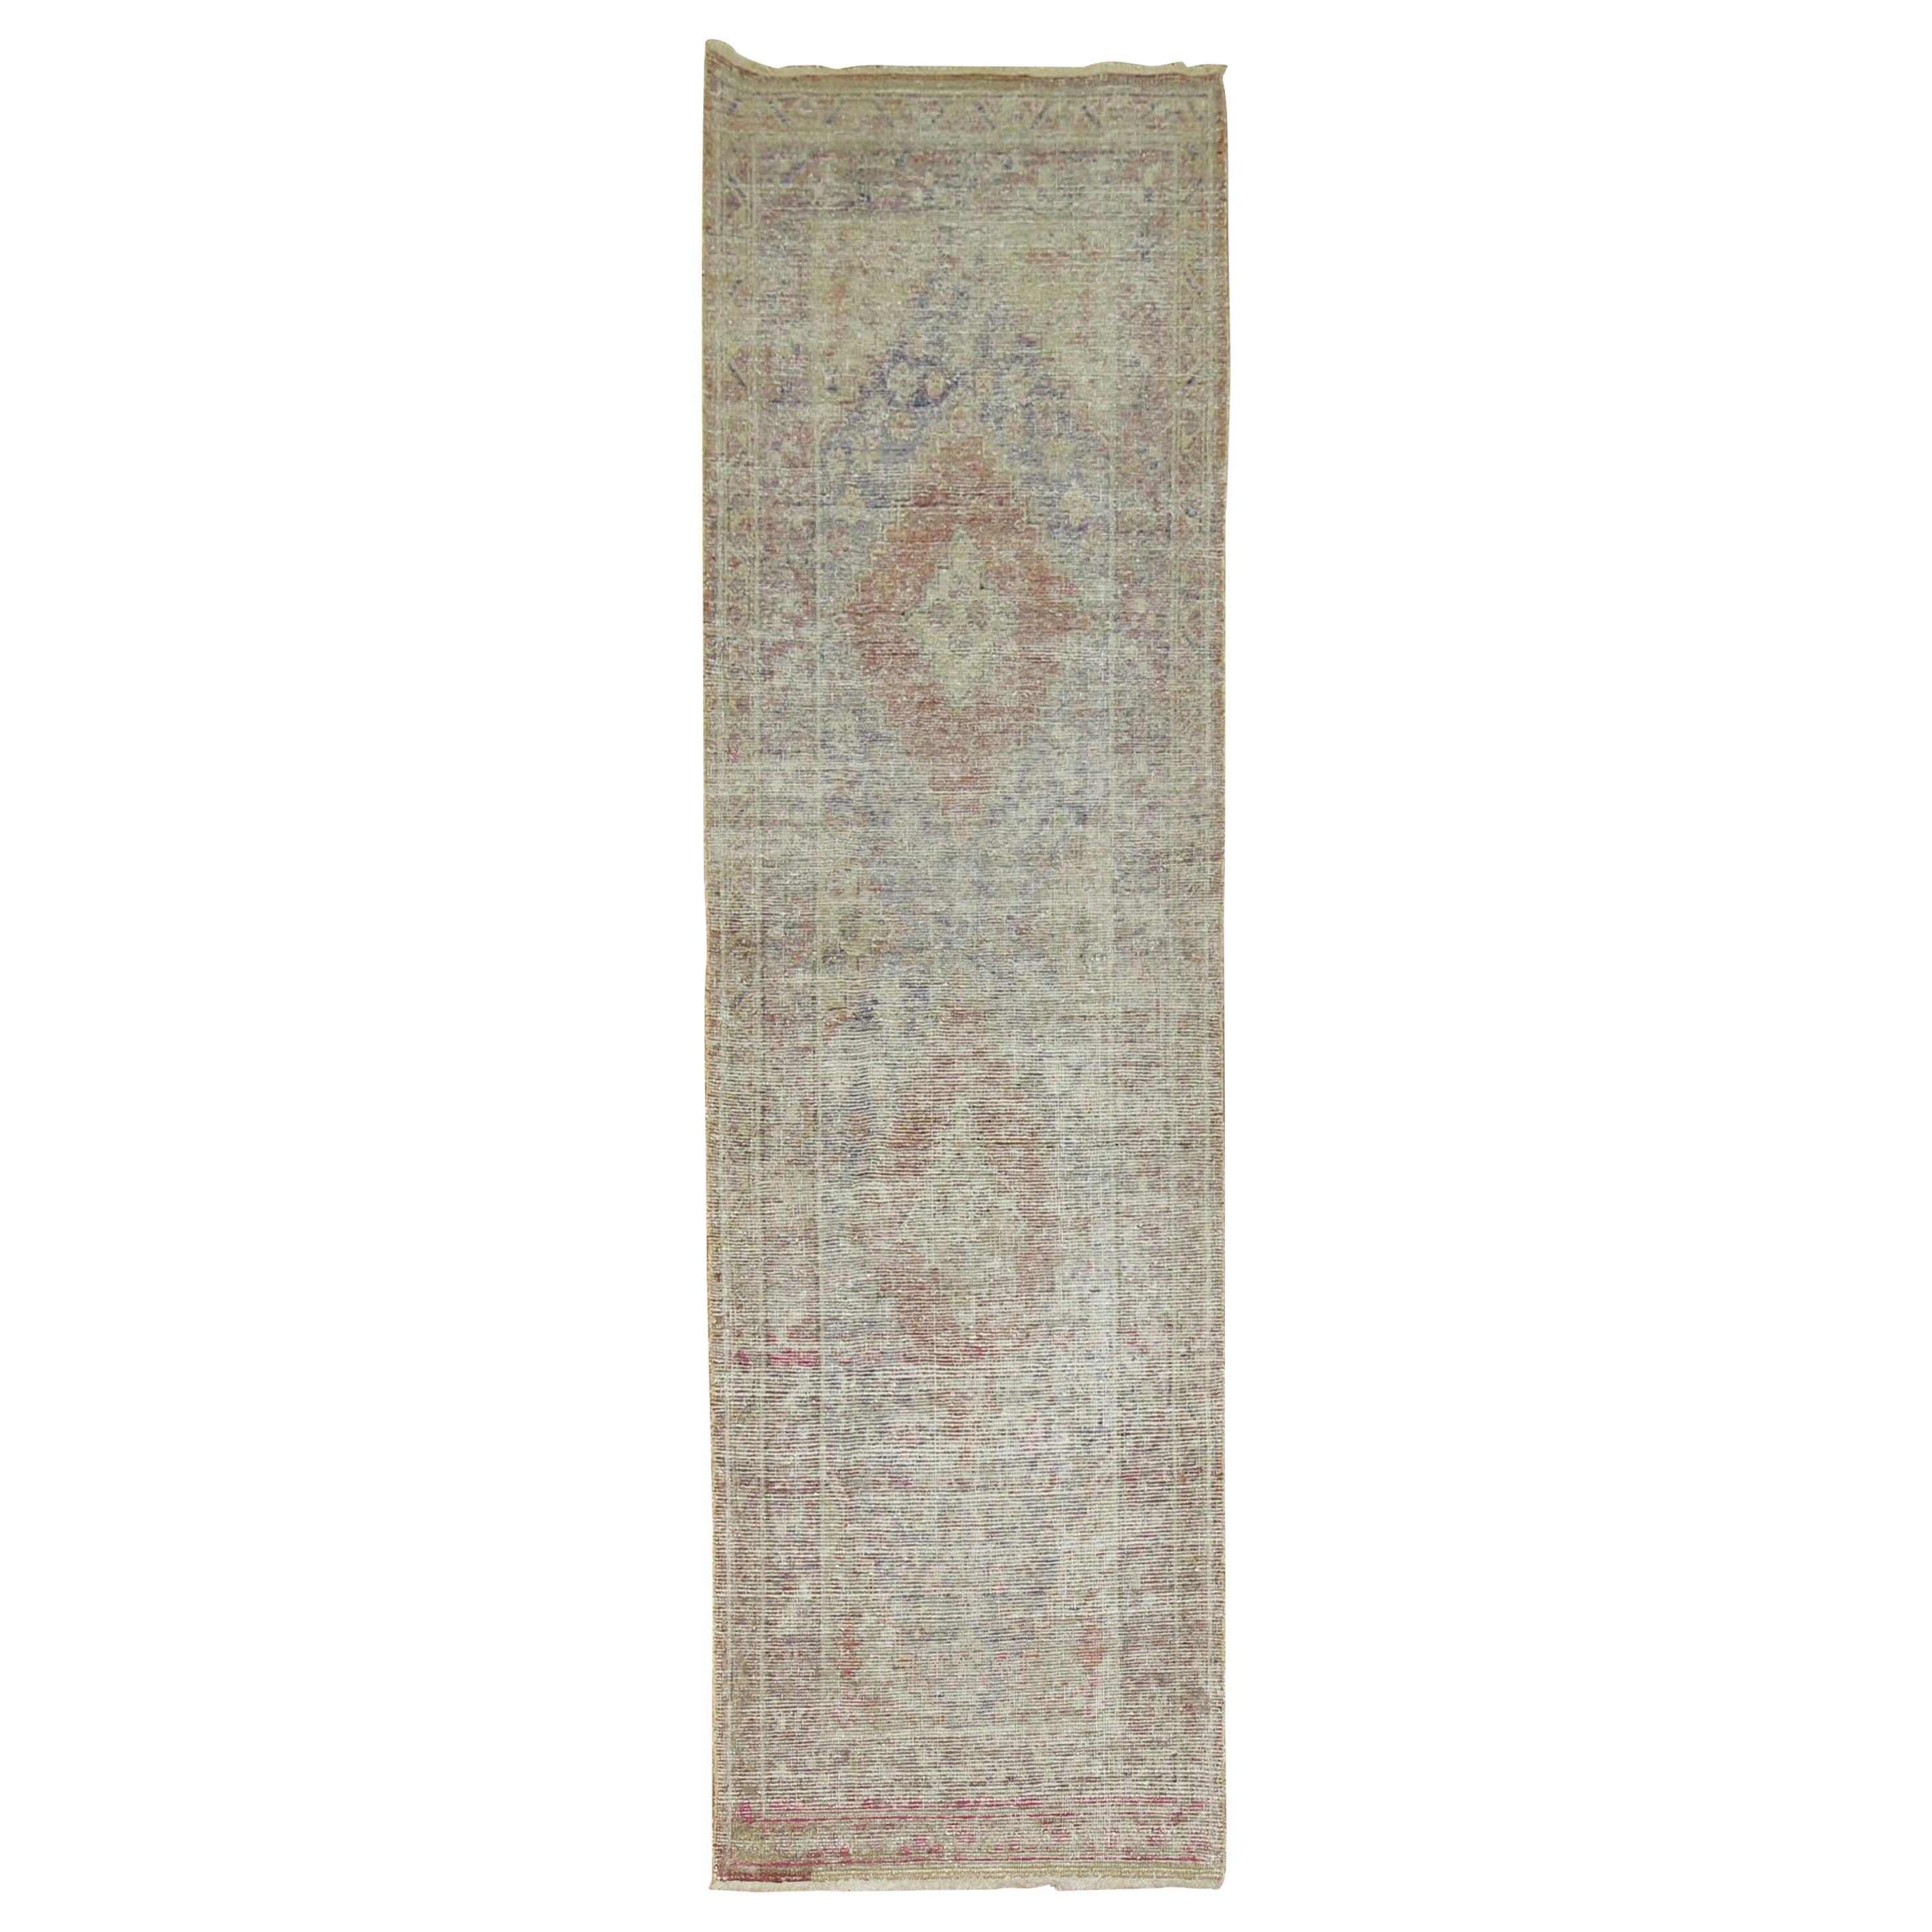 Late 19th century rare narrow size Khotan runner with faded weather textured appeal geometric design.

Measures: 2'3